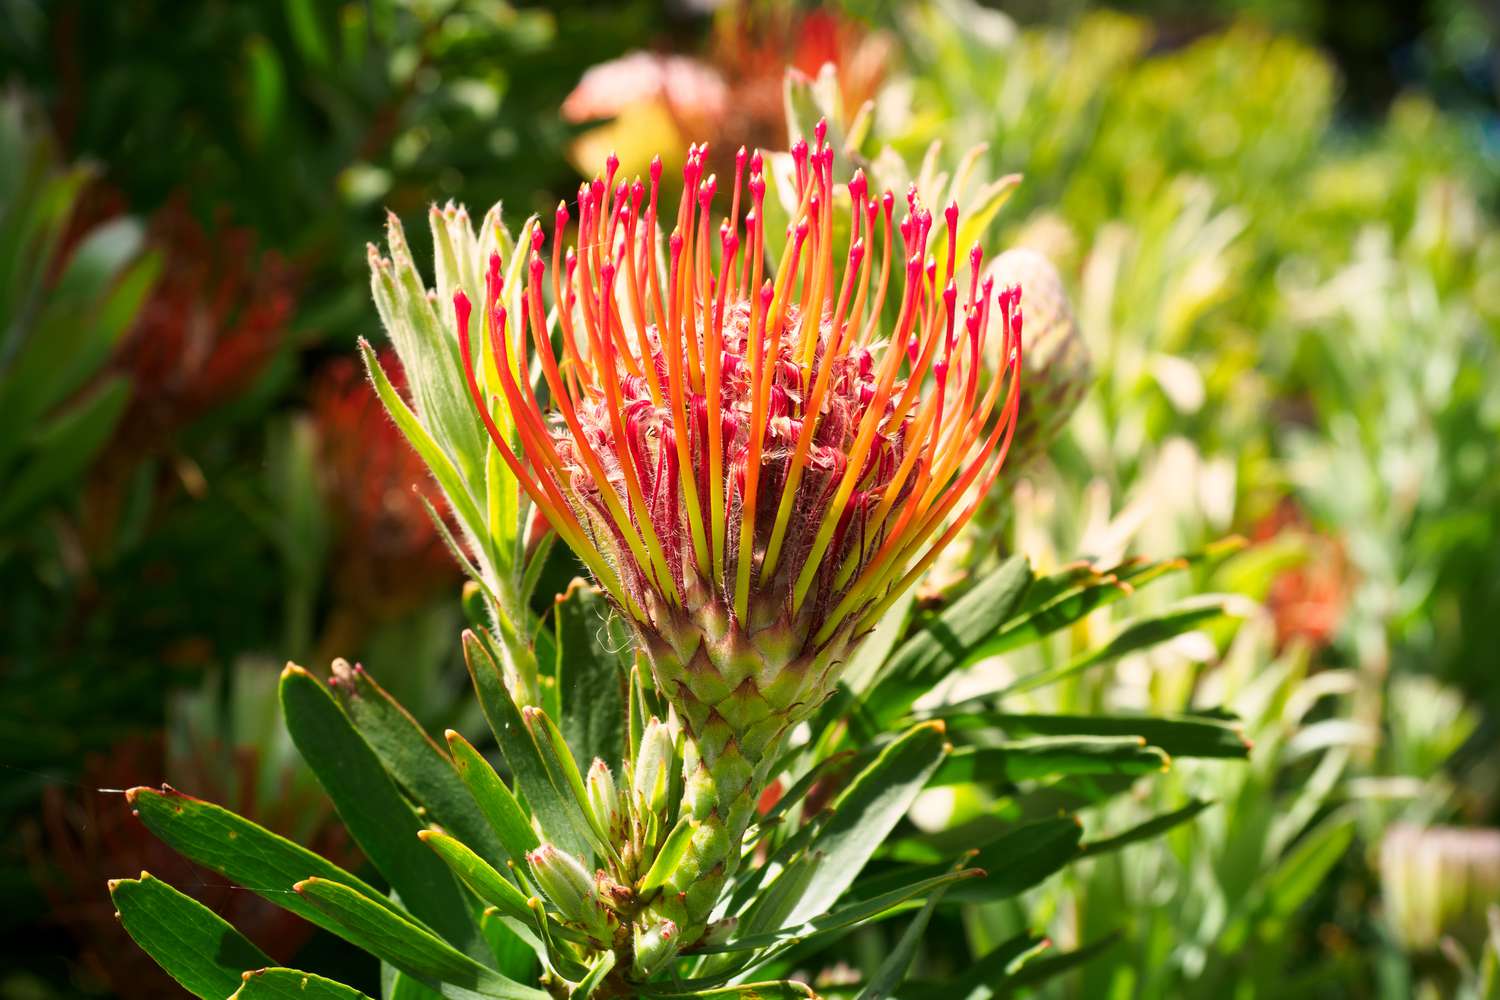 Protea plant with orange-red goblet-shaped bracts on flower stem